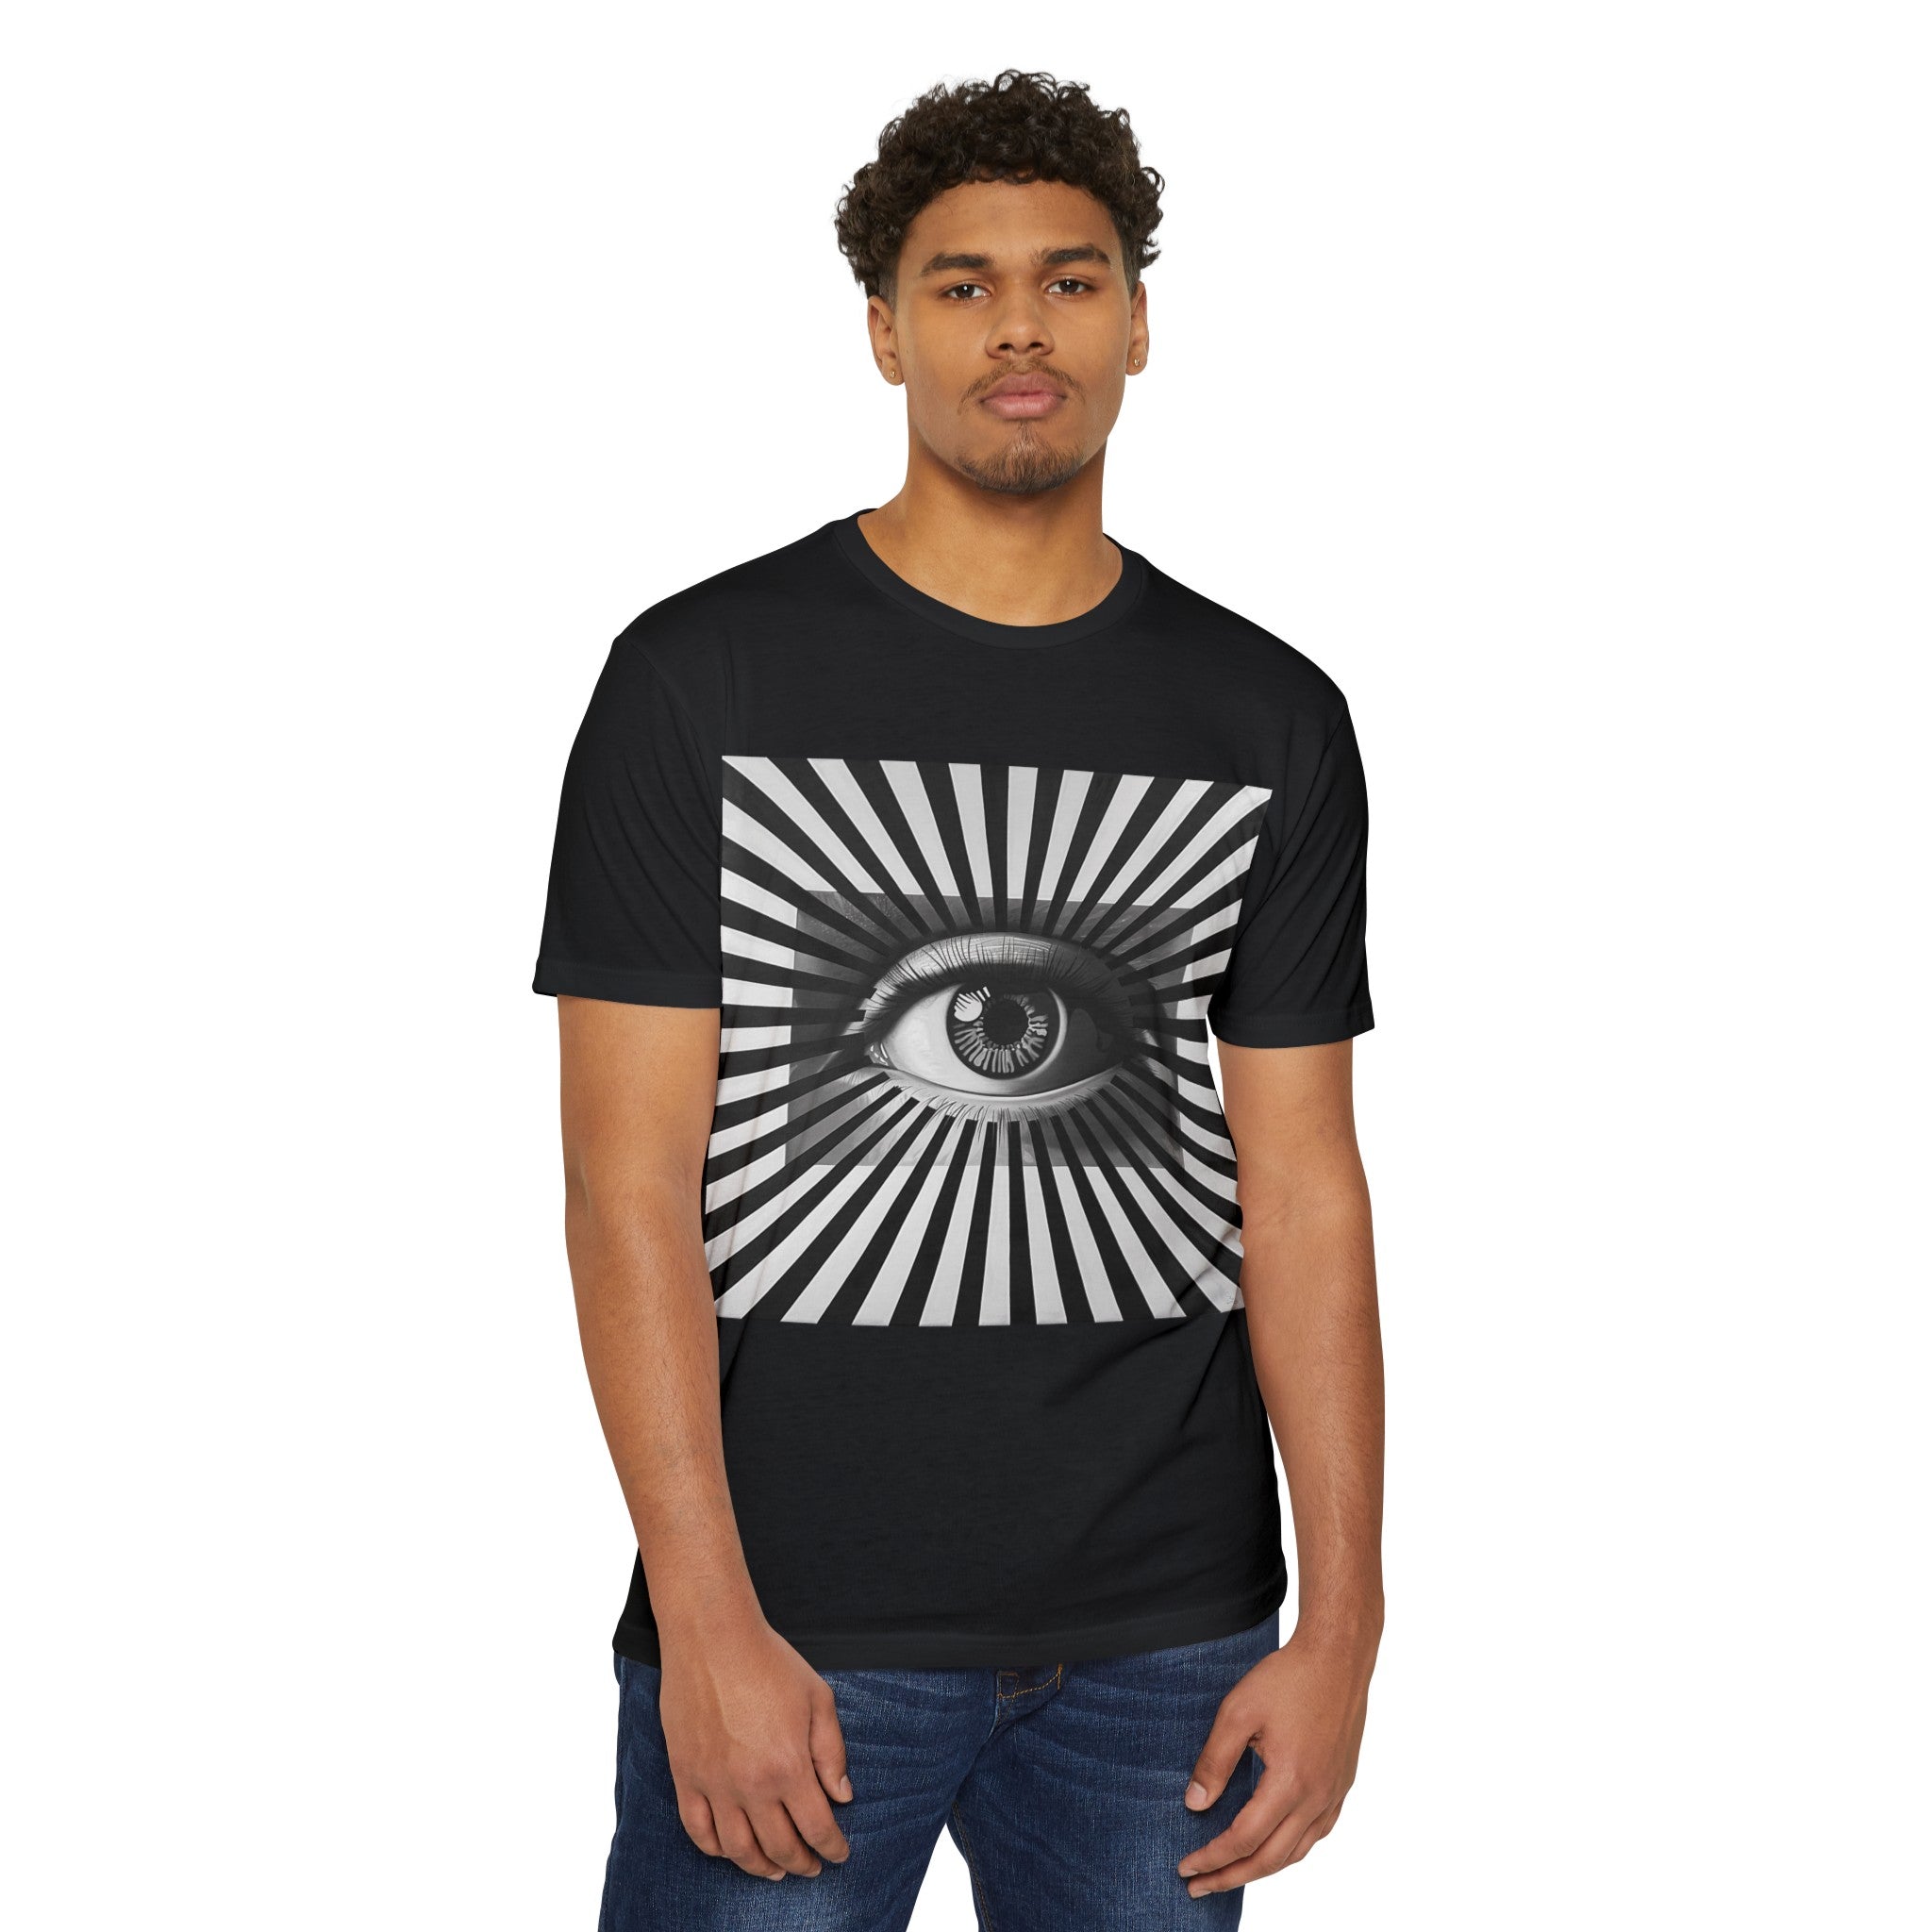 Perception Shift: 'Eye of the Beholder' Optical Illusion Eyeball Unisex CVC Jersey T-Shirt - A Play on Vision and Style